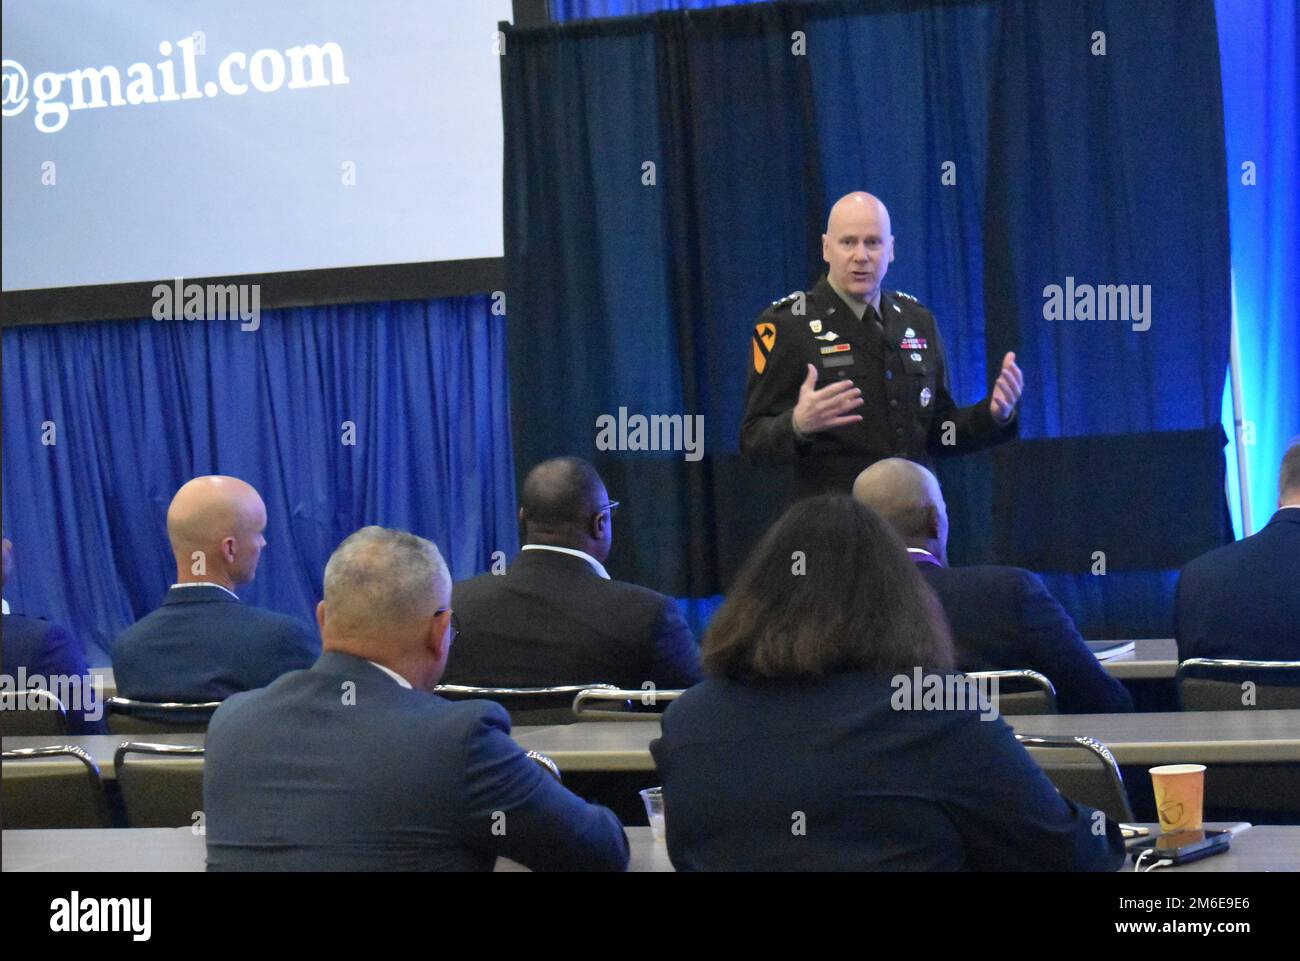 Deputy Chief of Staff, G-6 Lt. Gen. John B. Morrison, Jr. highlighted Army Risk Management Framework reforms during keynote remarks at the three-day Armed Forces Communications Electronics Association's TechNet Cyber event at the Baltimore Convention Center on April 26, 2022. Lt. Gen. Morrison is the principal advisor to the Chief of Staff of the Army for command, control, communications, cyber operations, and networks for worldwide operations. Stock Photo